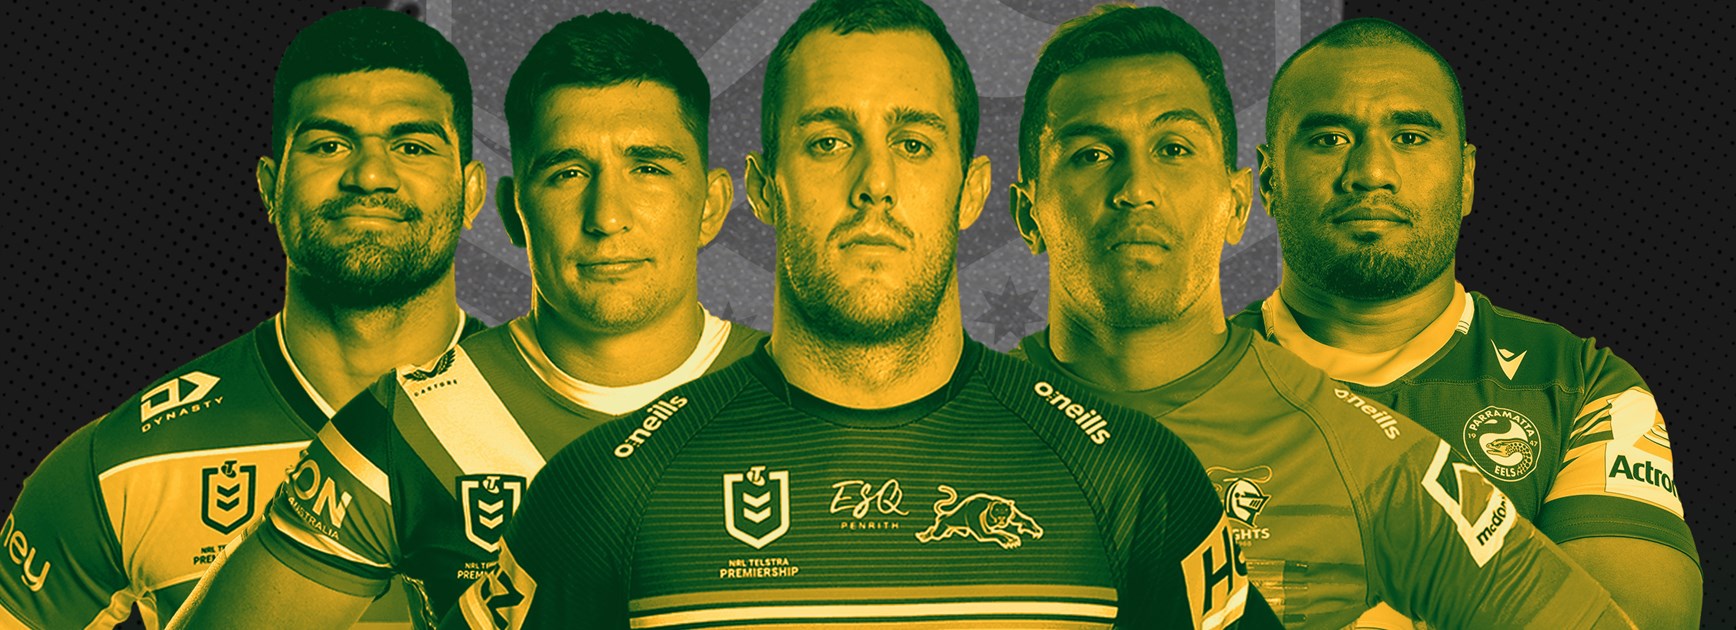 Kangaroos Form Team: Injuries open door for recalls and new faces